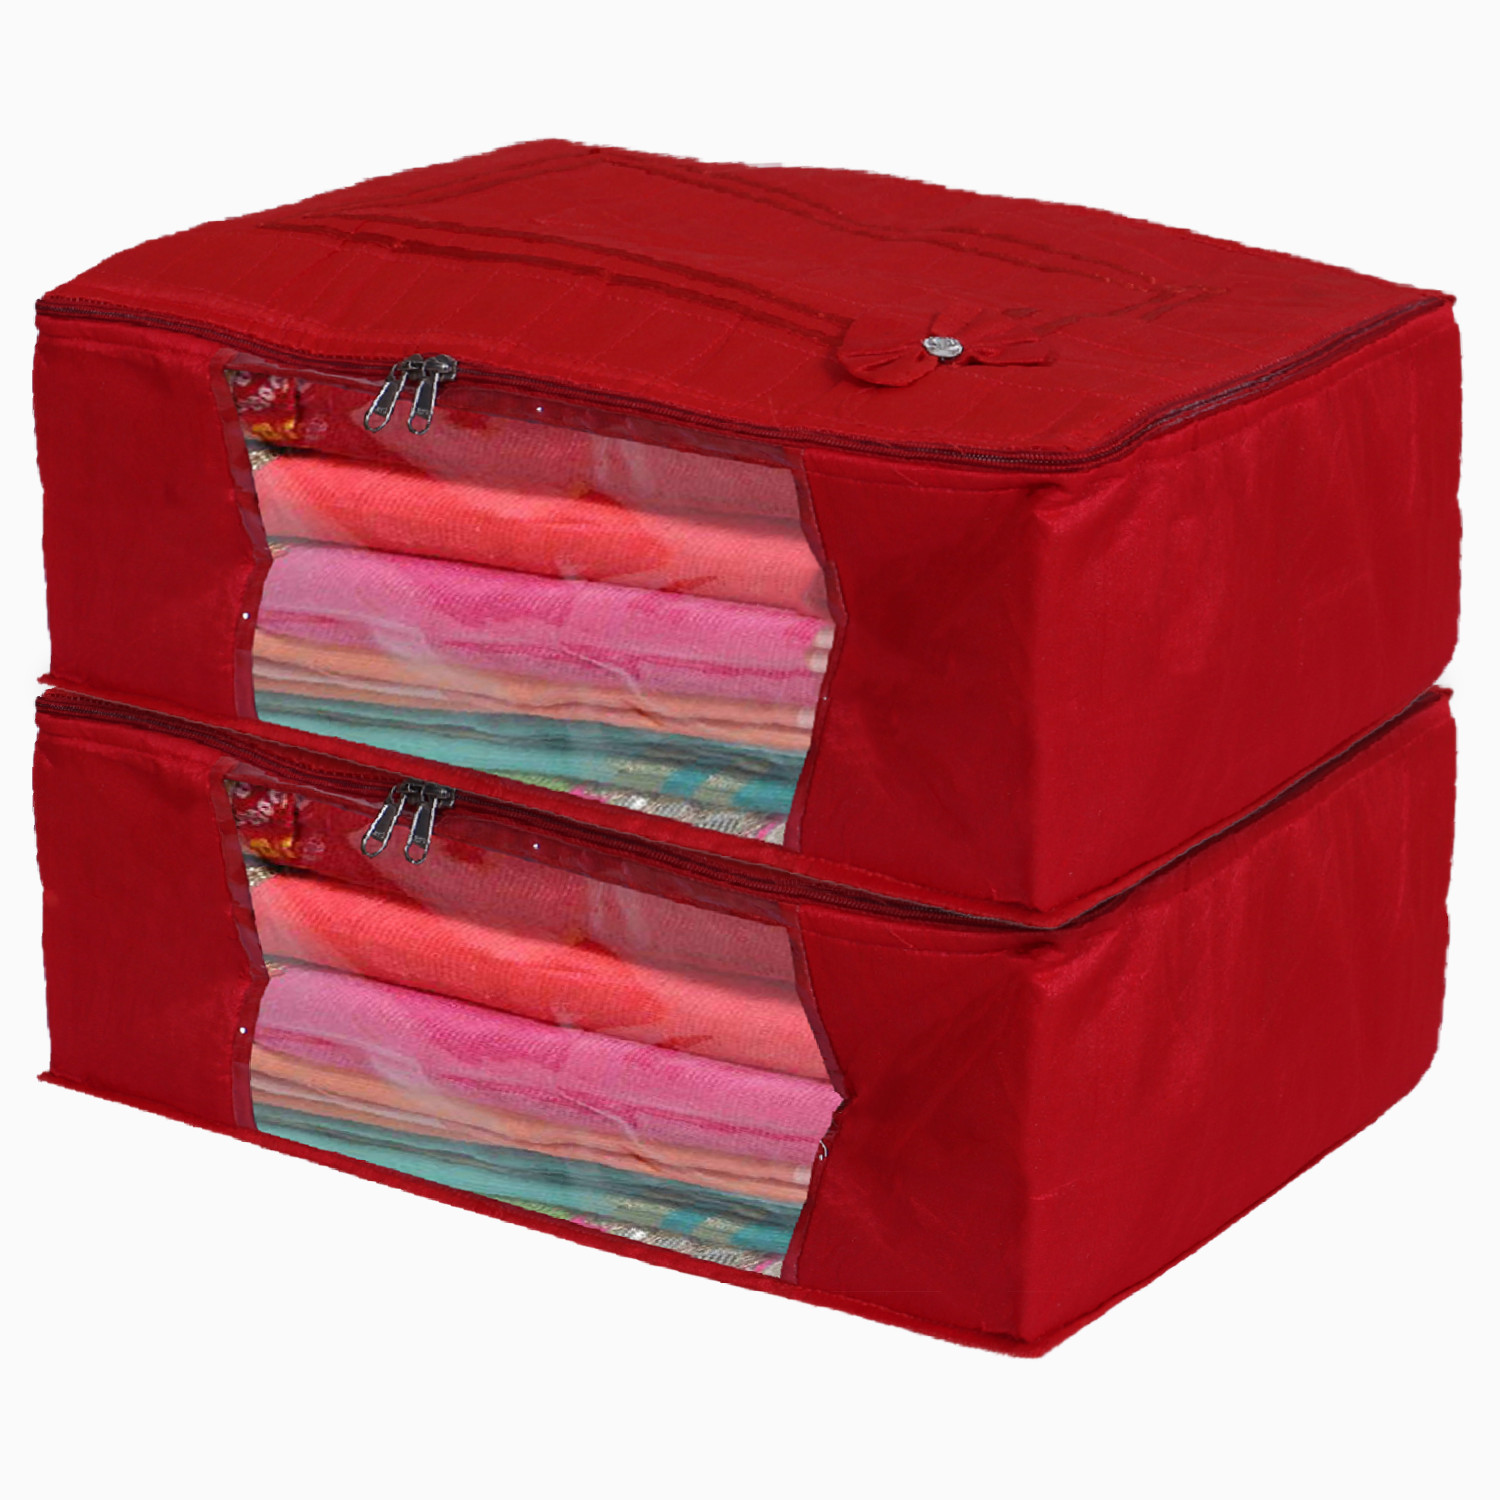 Kuber Industries Multiuses Foldable Cotton Saree Covers/Clothes Storage Bag/Wardrobe Organizer With Transparent Window (Red)